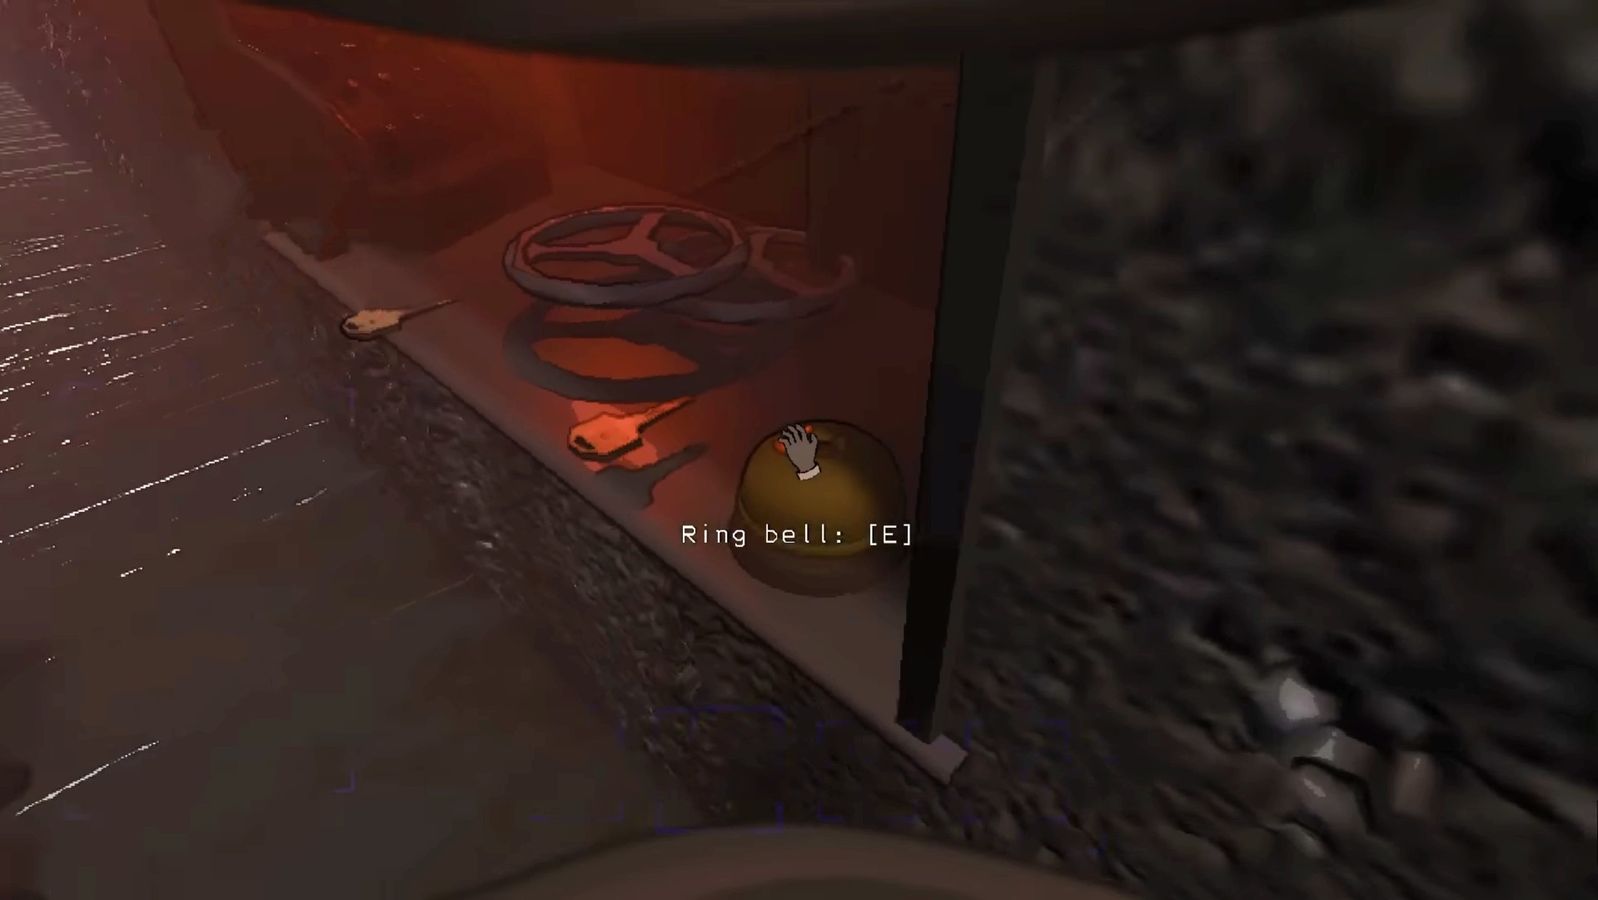 Lethal Company - "Ring bell: E", screenshot of the shop counter